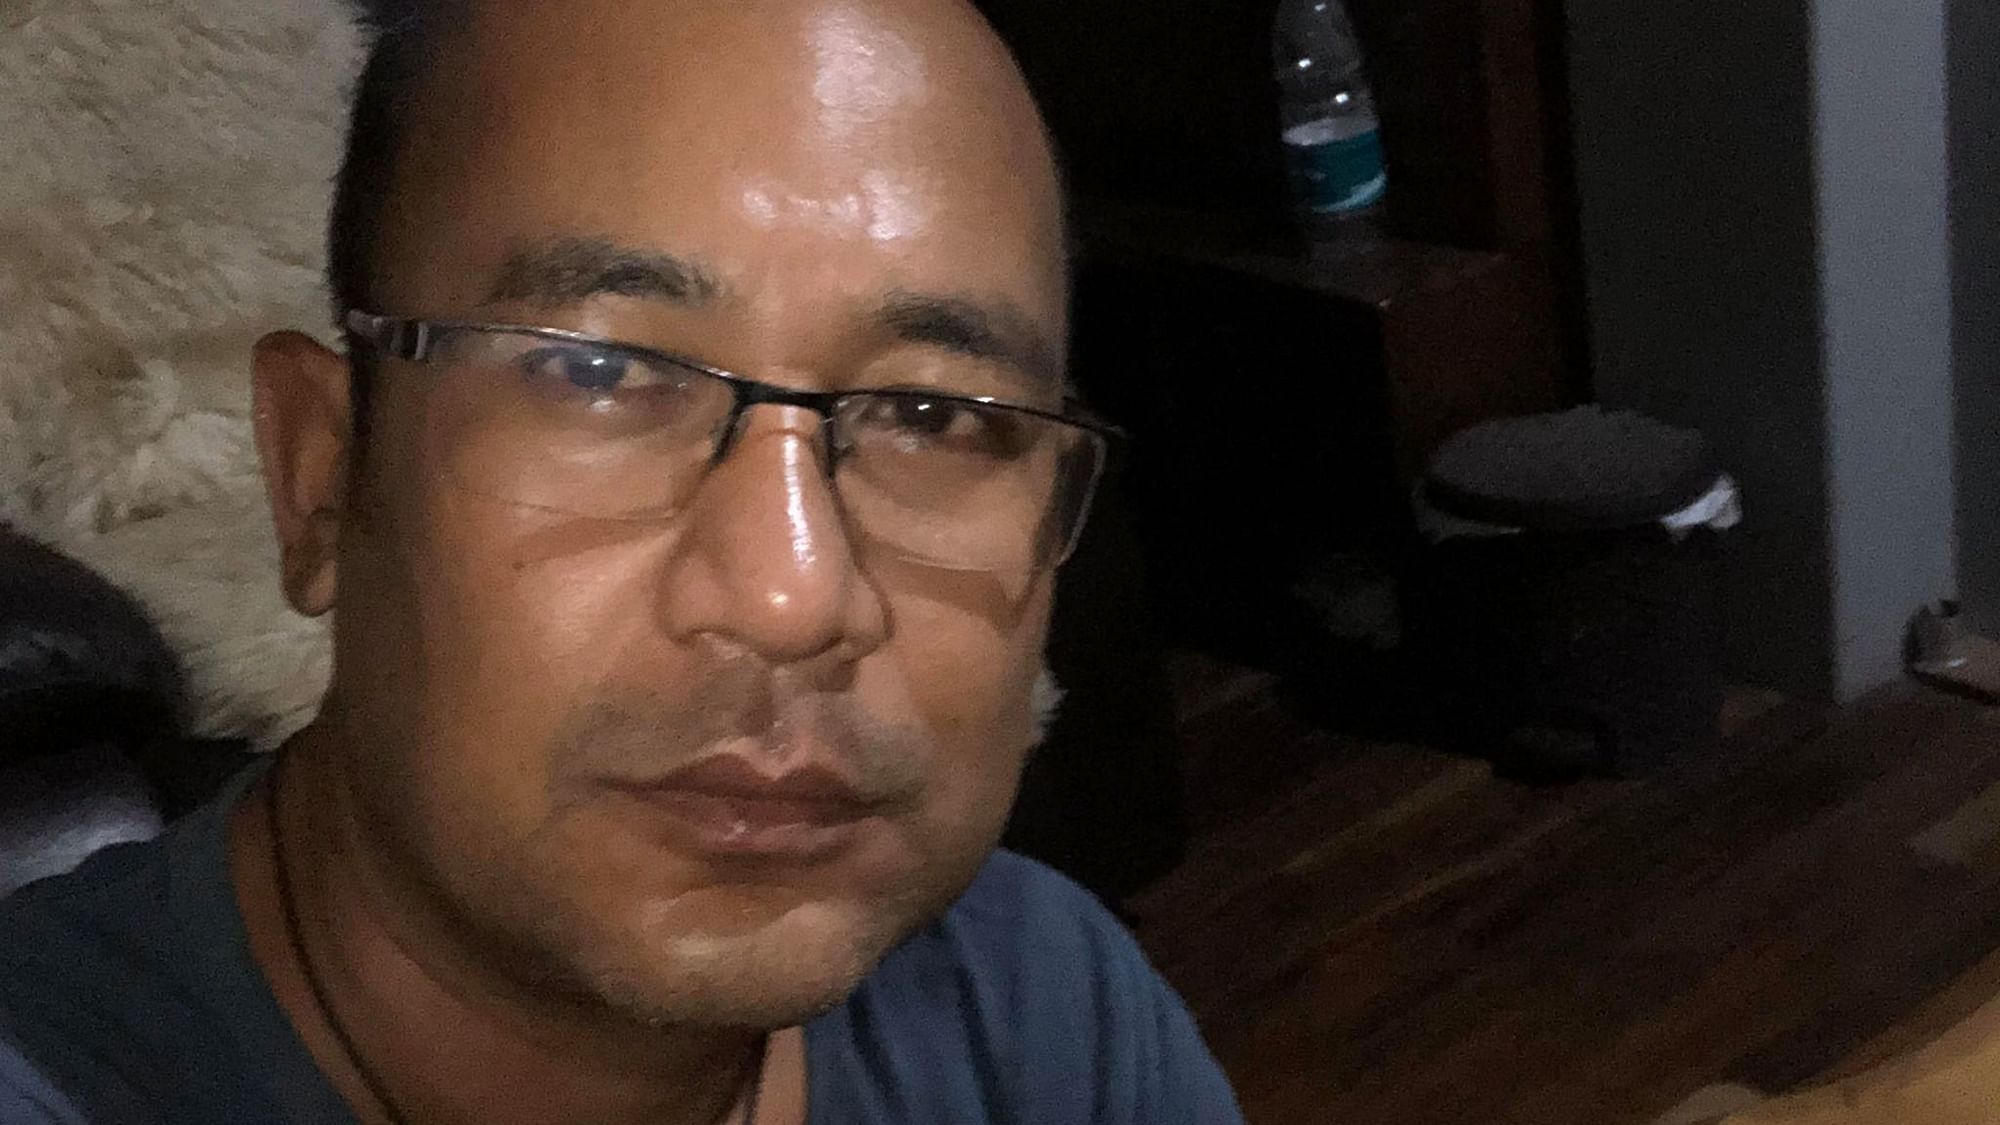 Imphal-based journalist Paojel Chaoba is the first to receive a notice from the state government under the Centre’s new digital media rules.